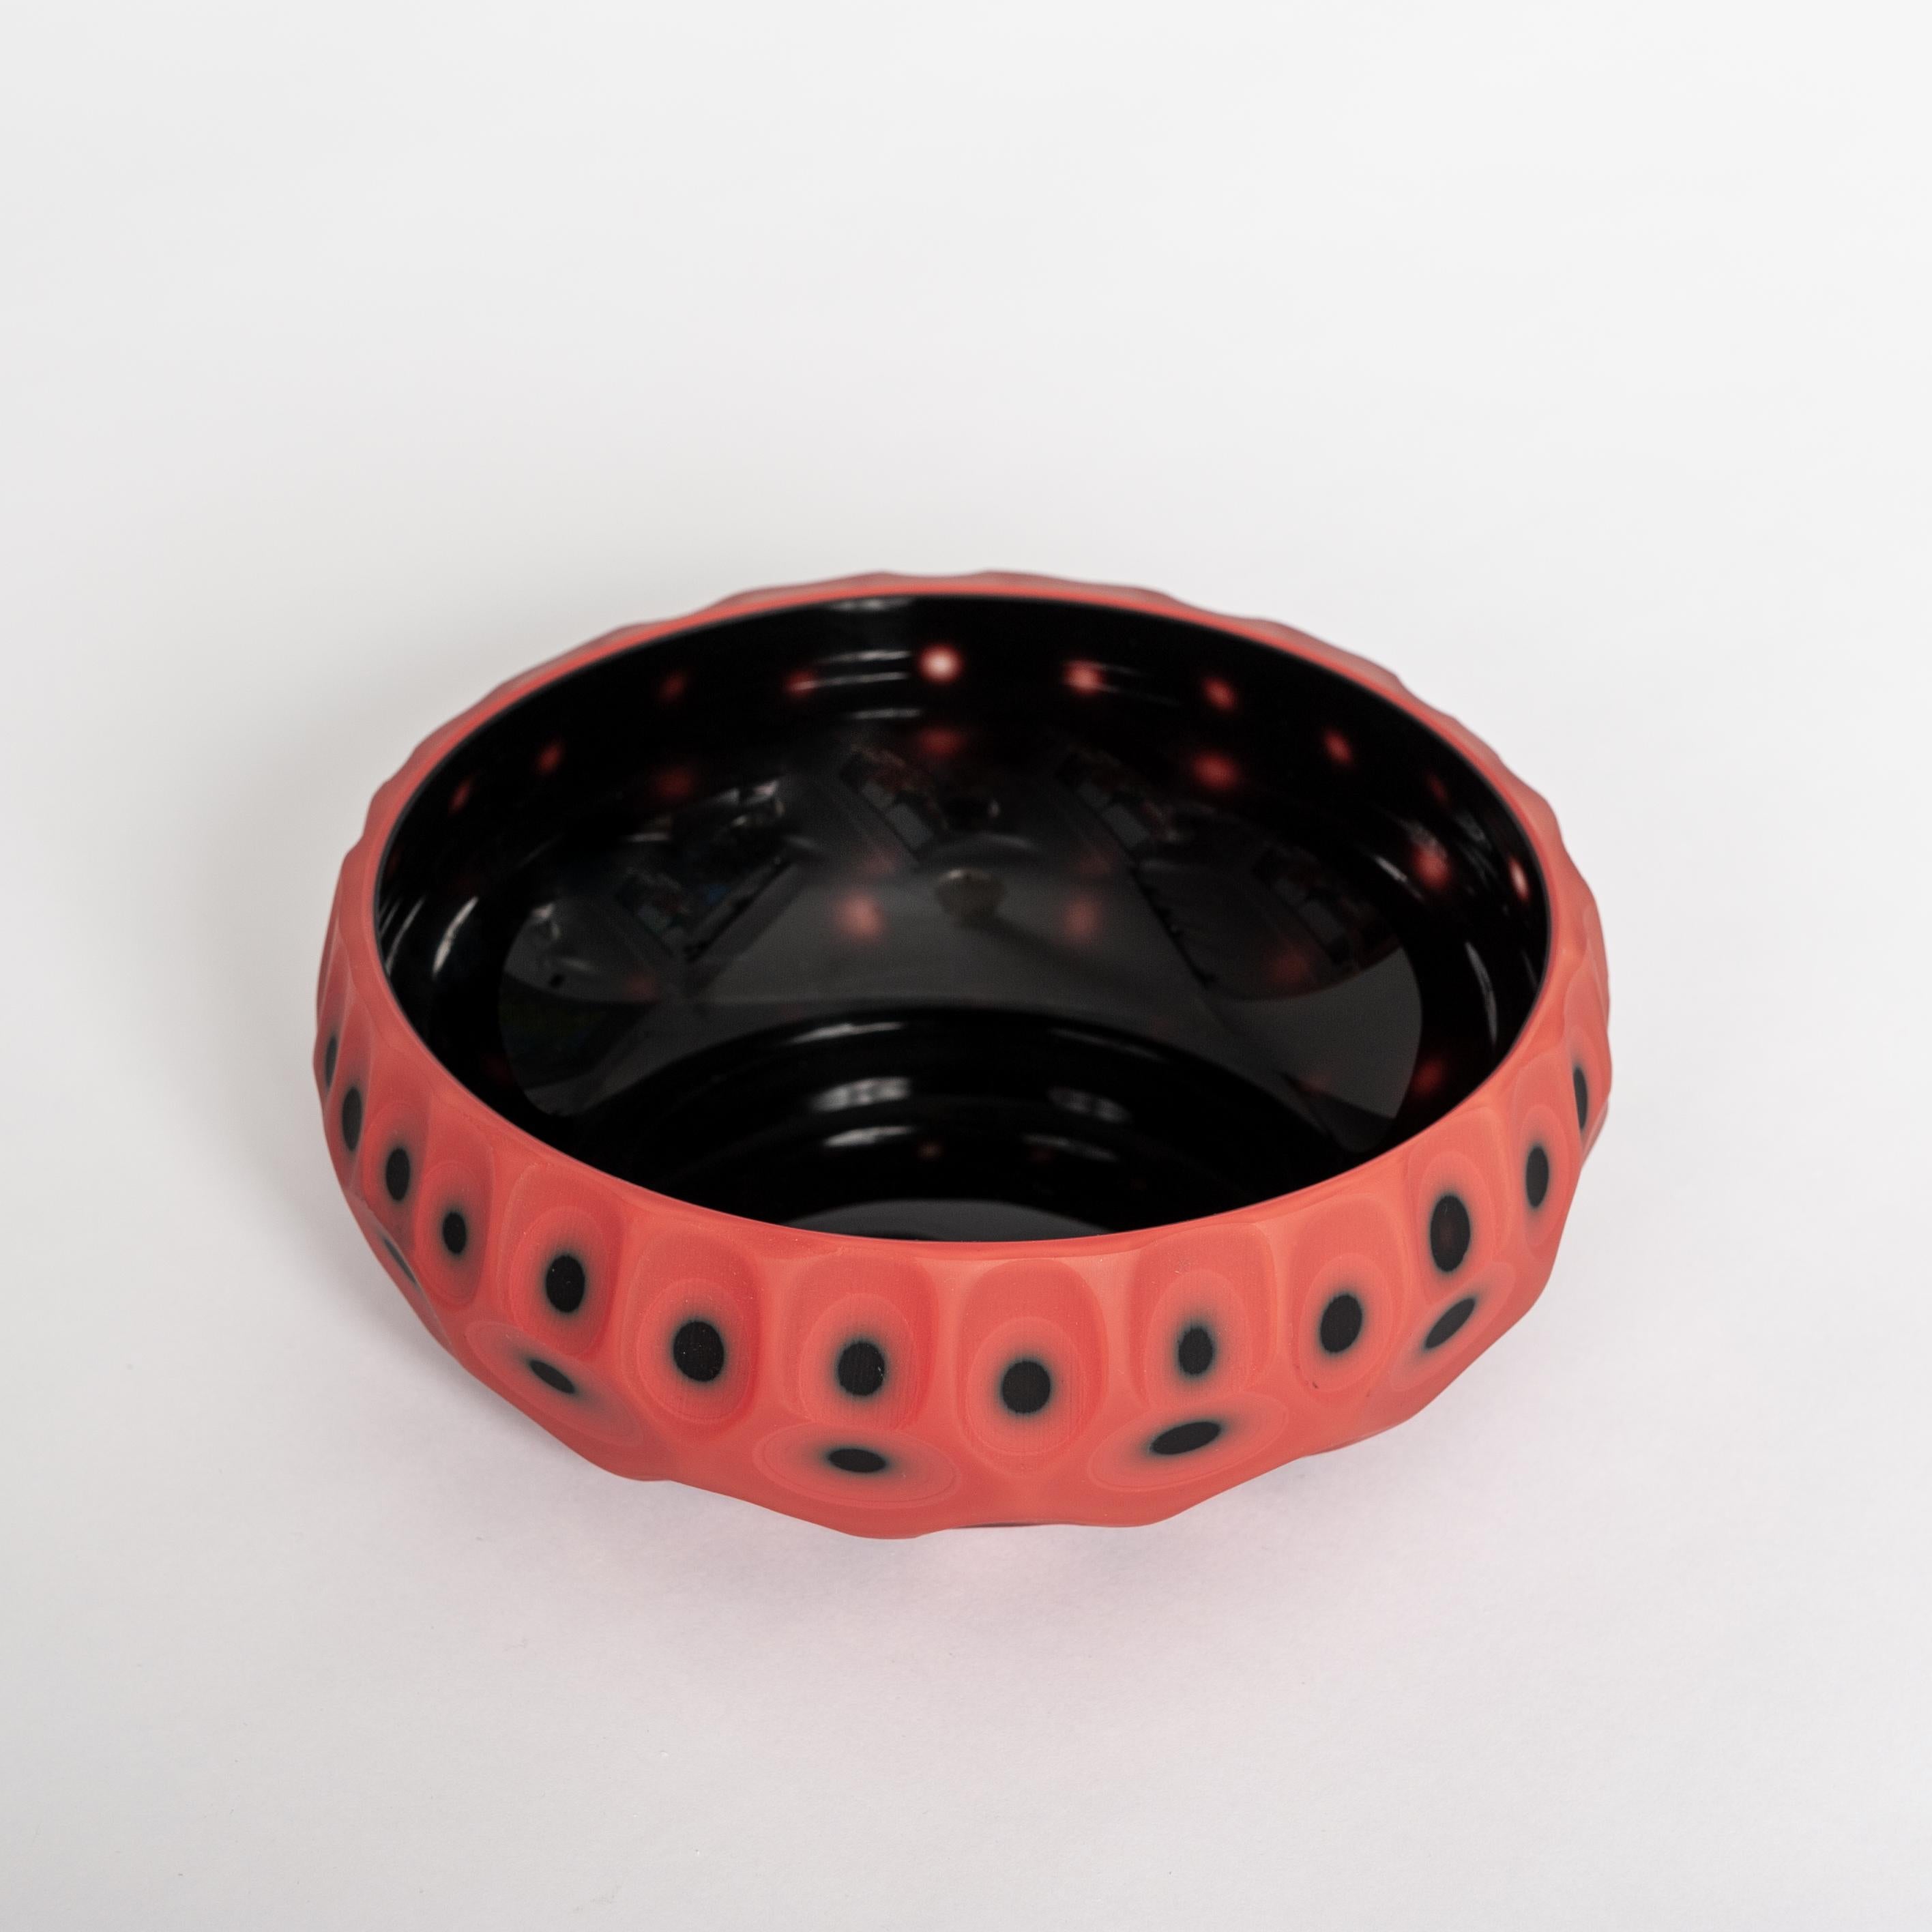 Hand-Crafted Italian Modern Coral-Black Murano Glass Bowls with Battuto Decor by Afro Celotto For Sale